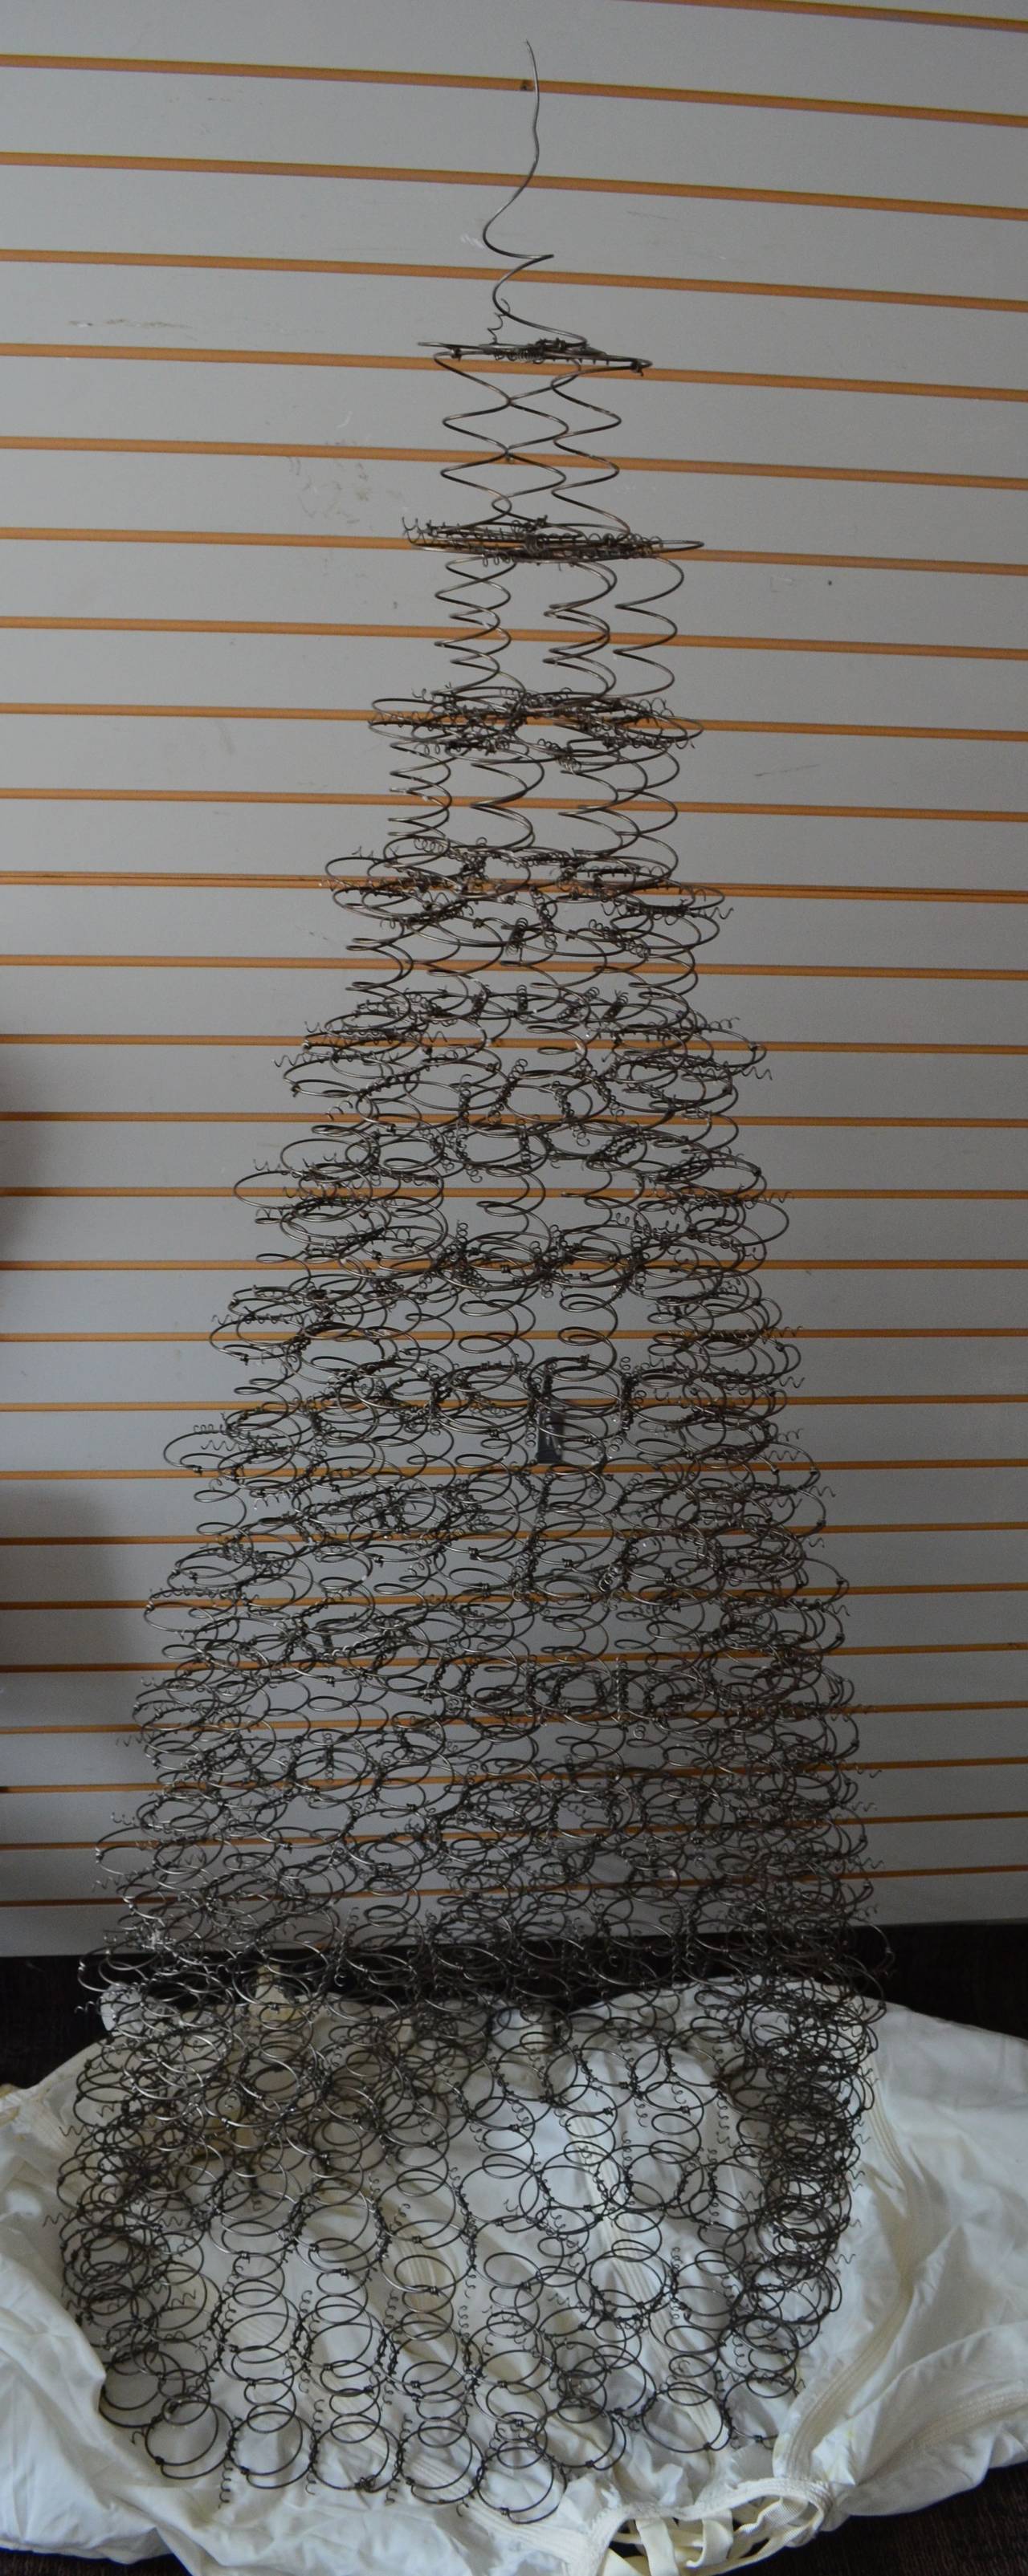 Mattress springs have been handwoven into a captivating, conical-shaped tree.  These steel springs were salvaged from vintage mattresses and have been intricately woven by hand into the shape of an evergreen tree. While this mattress spring tree